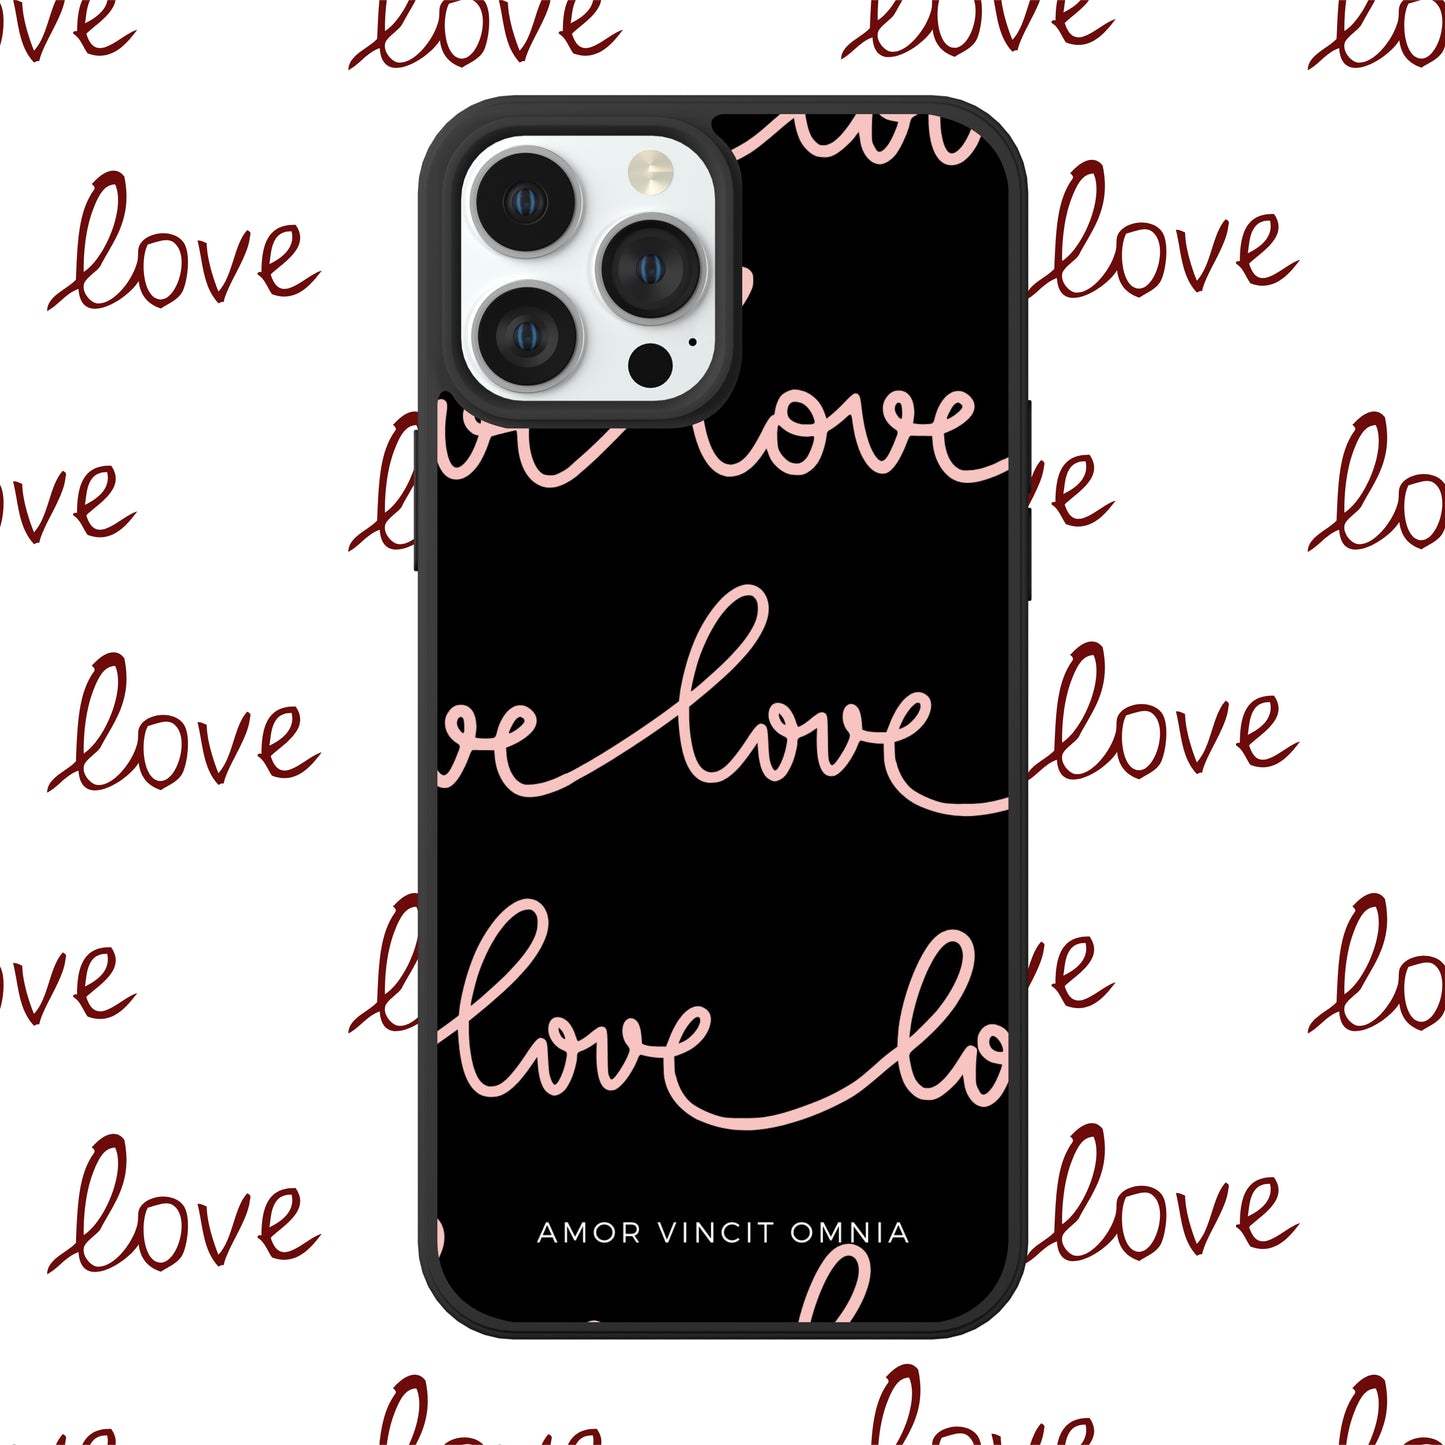 10. COVER LOVE IS